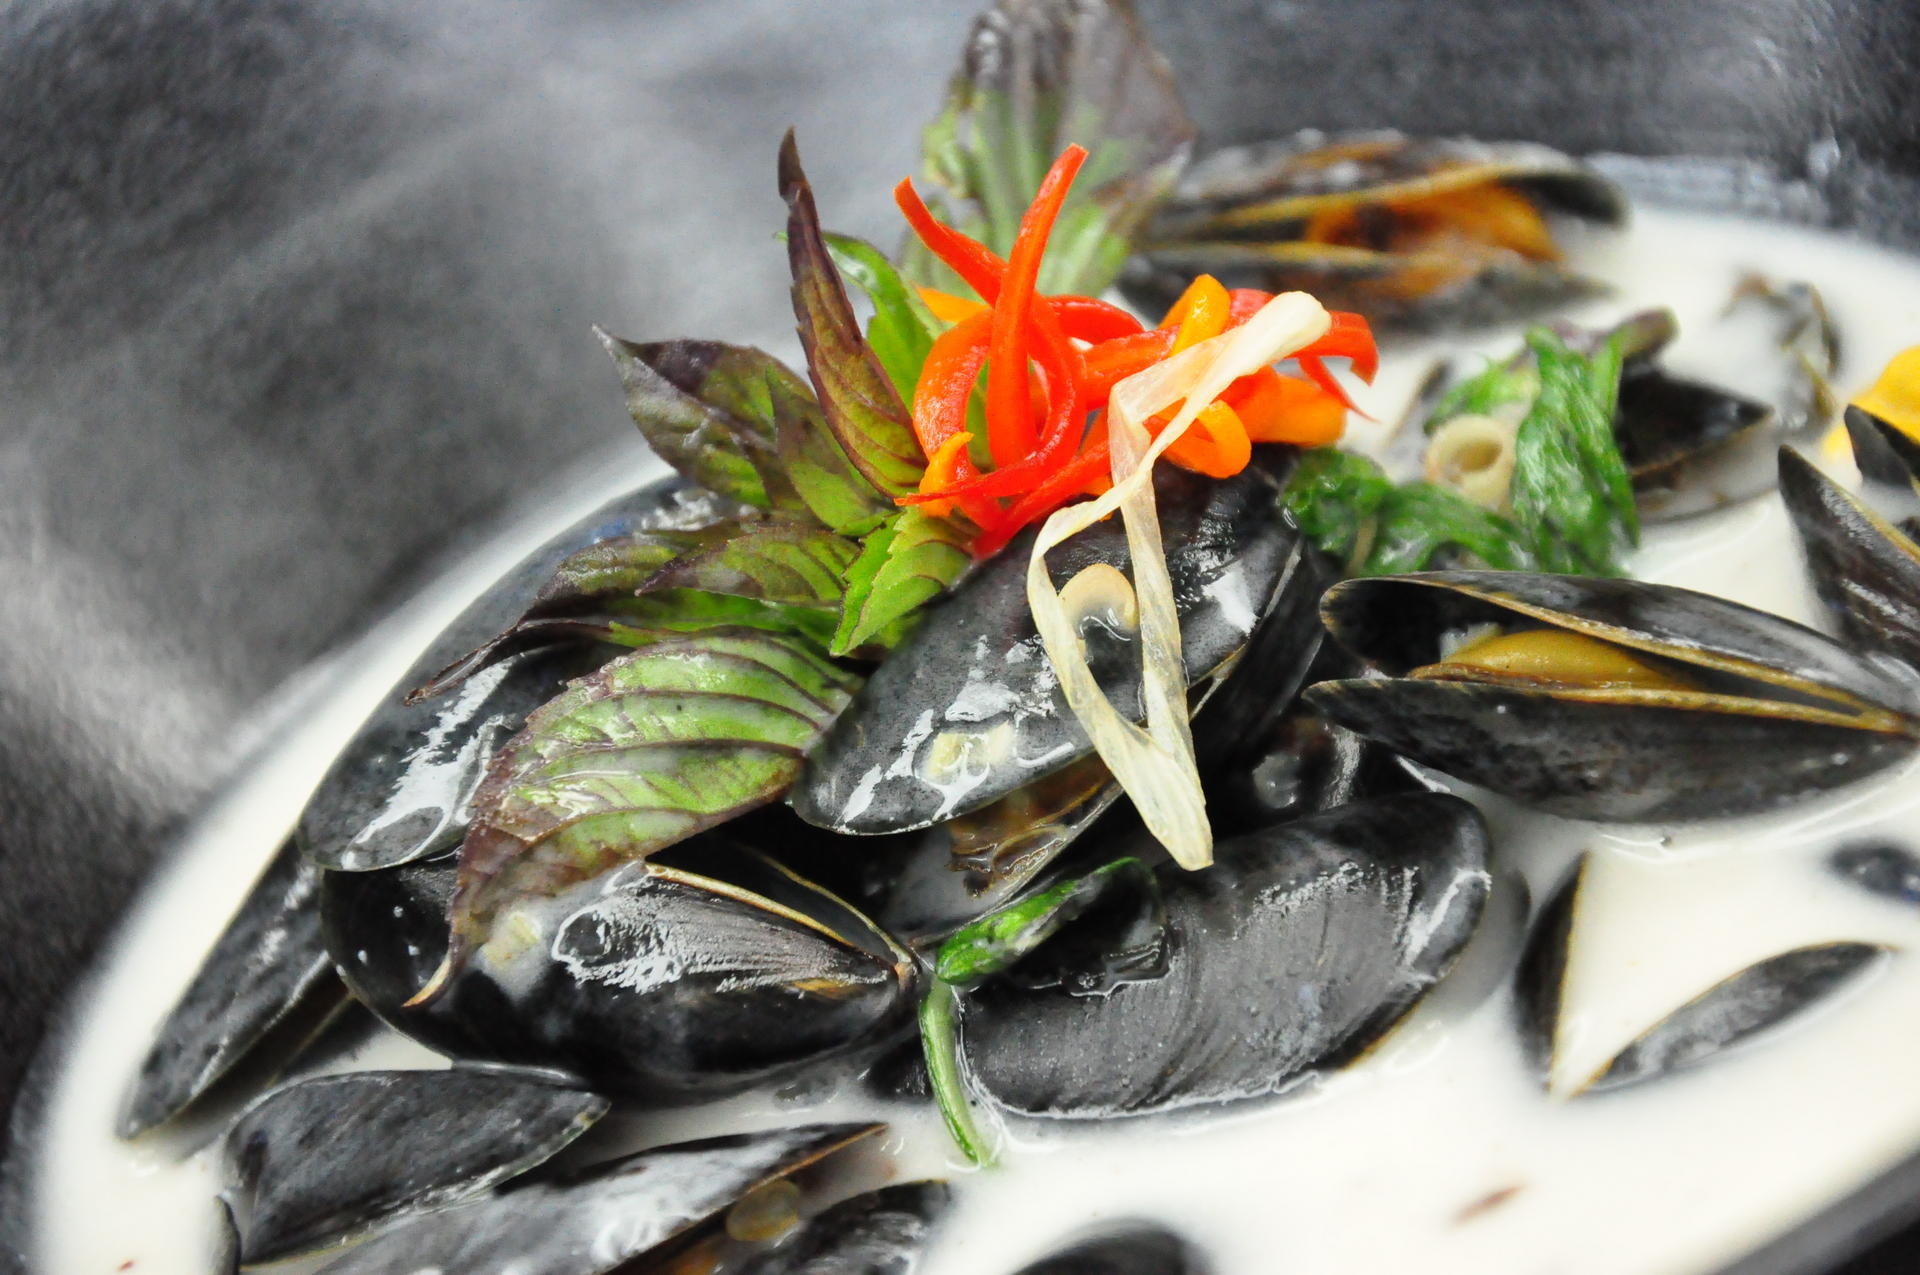 Mussels at Namo Avant Thai. The restaurant is a tranquil place for indoor dining.